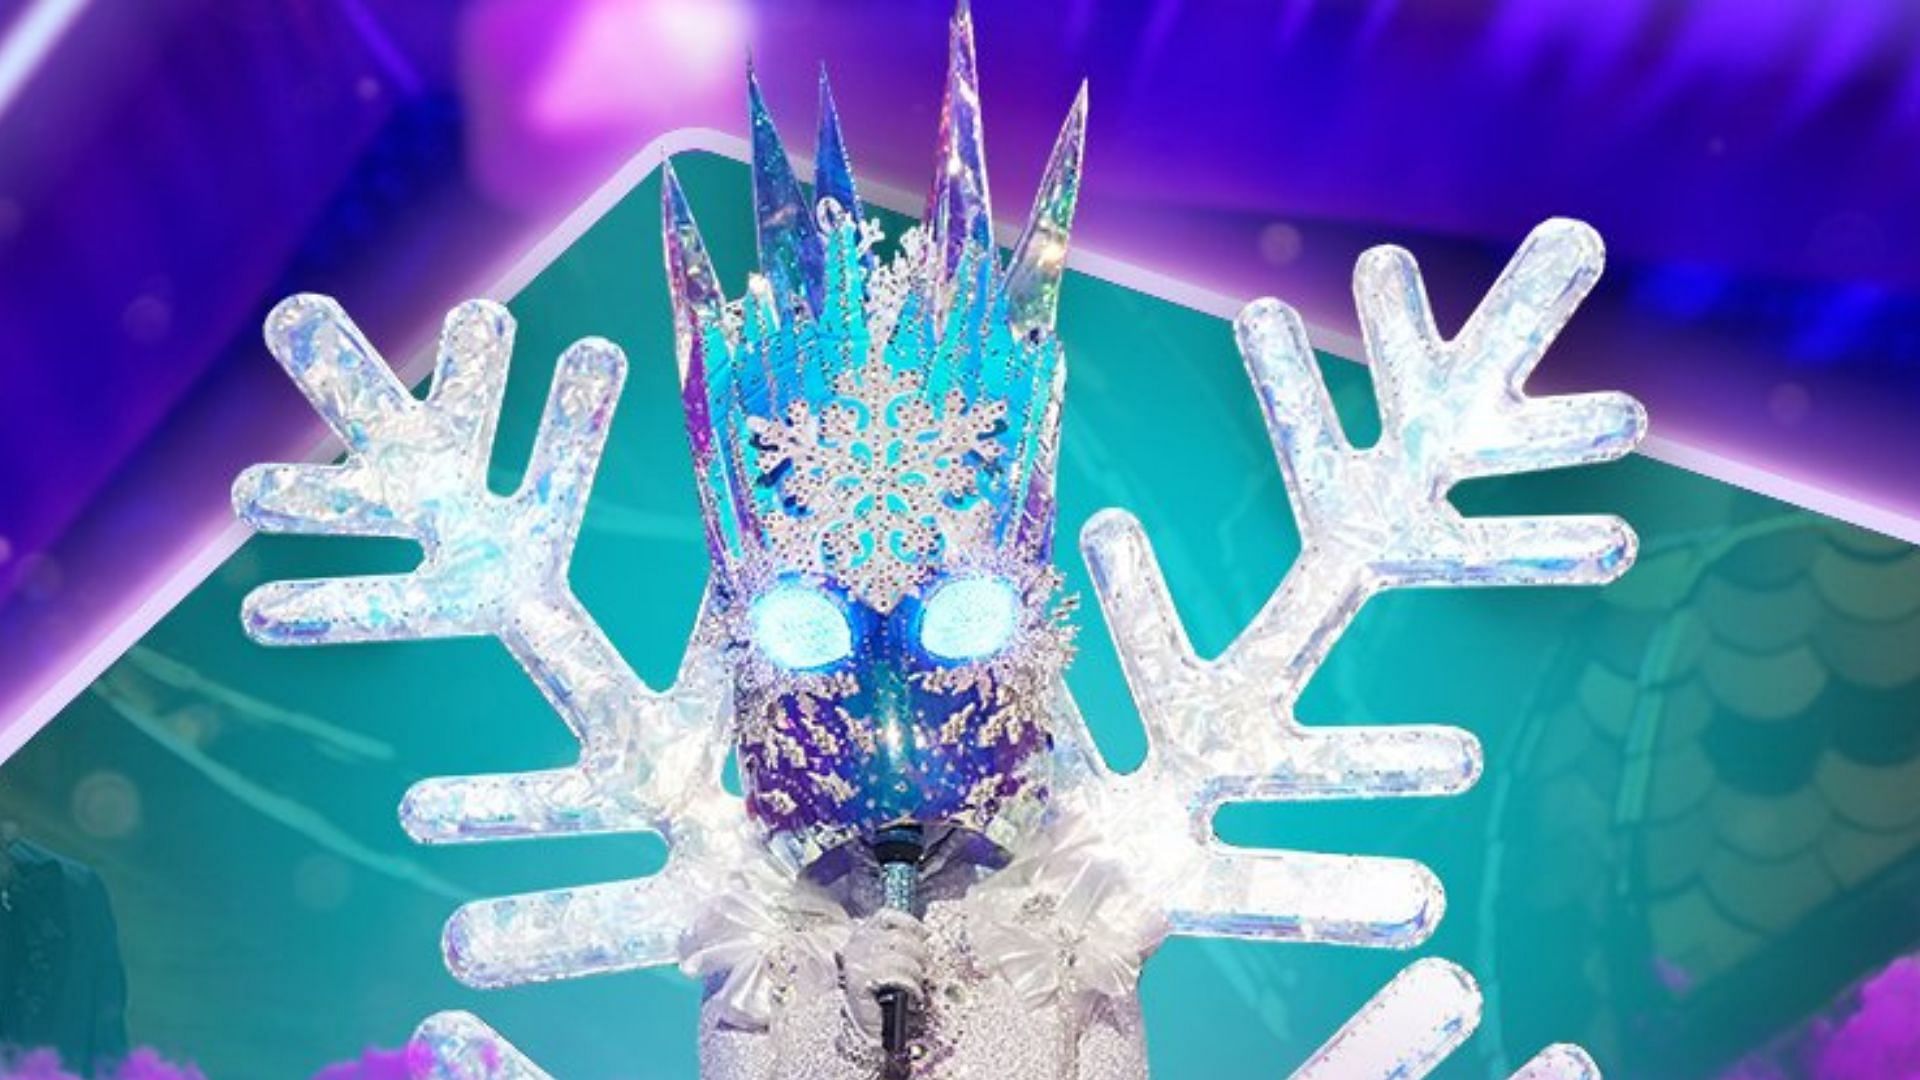 The Snowstorm from The Masked Singer (Image via Twitter/@MaskedSingerFOX)